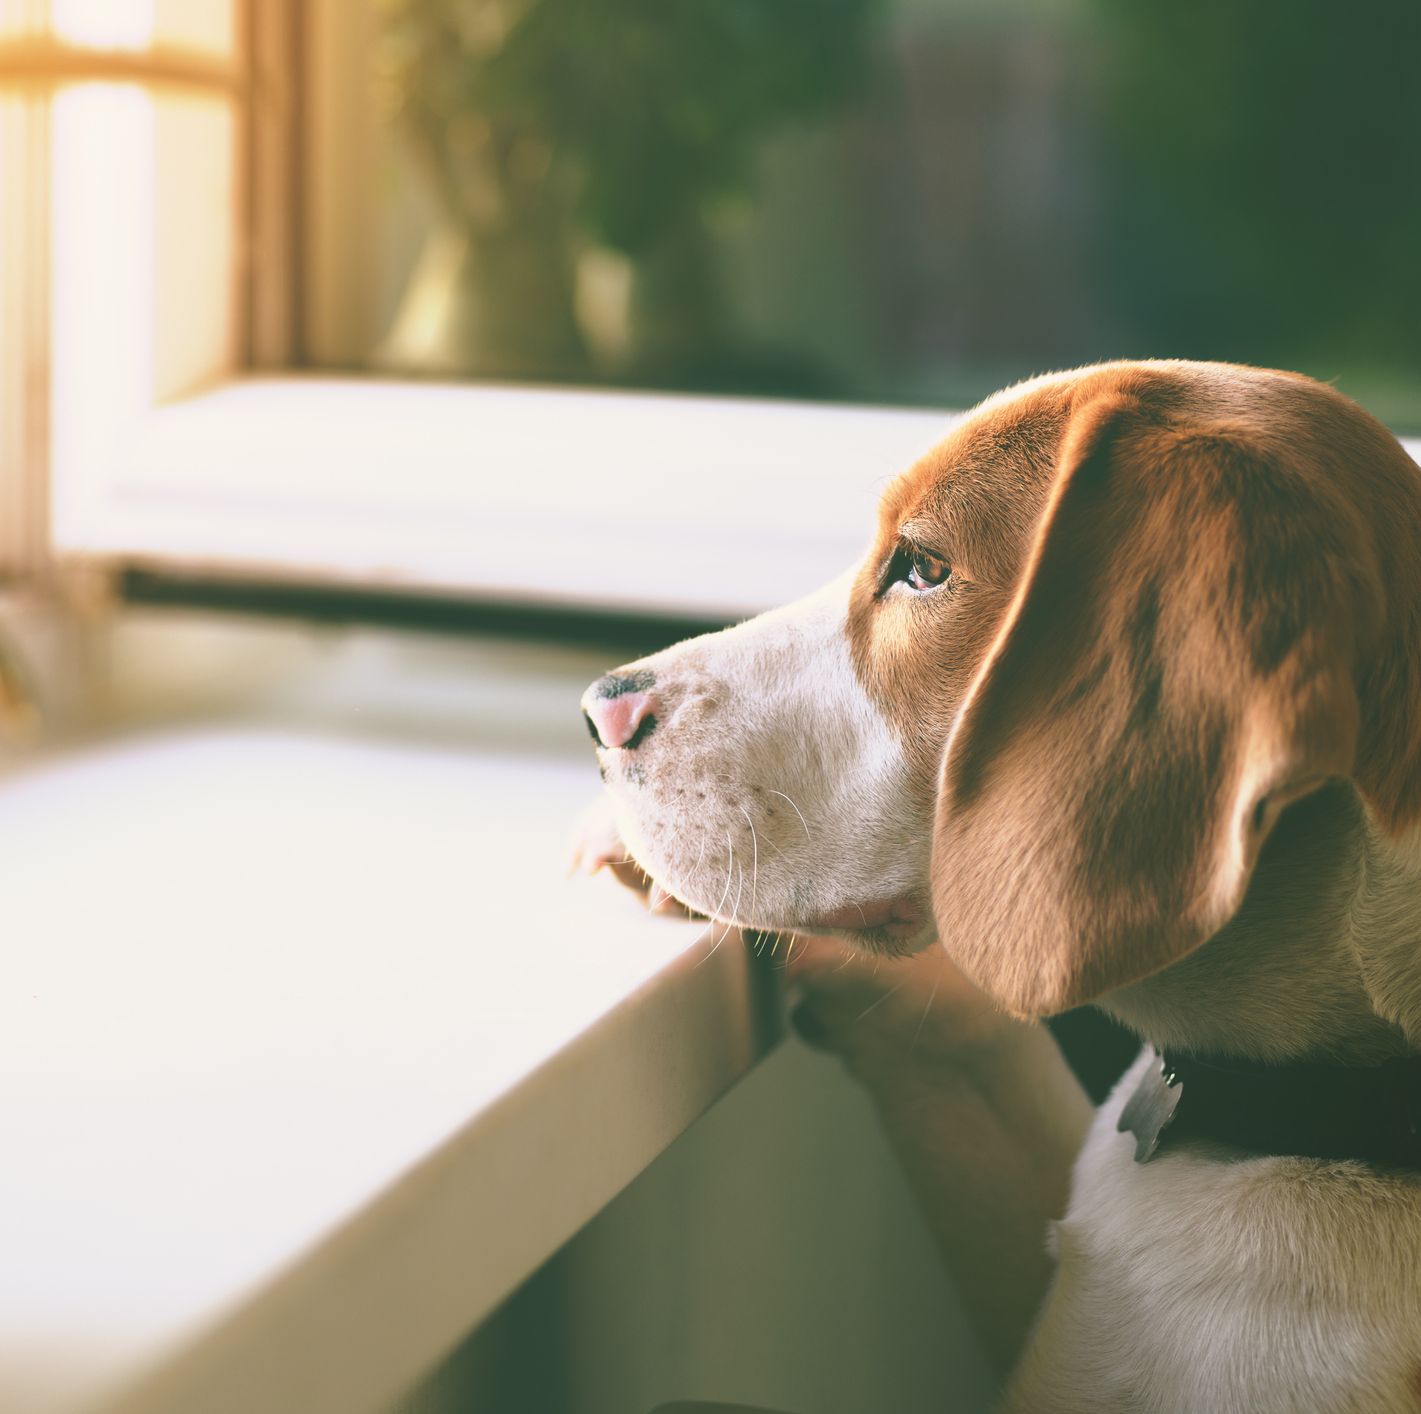 5 Signs Your Dog Is Bored